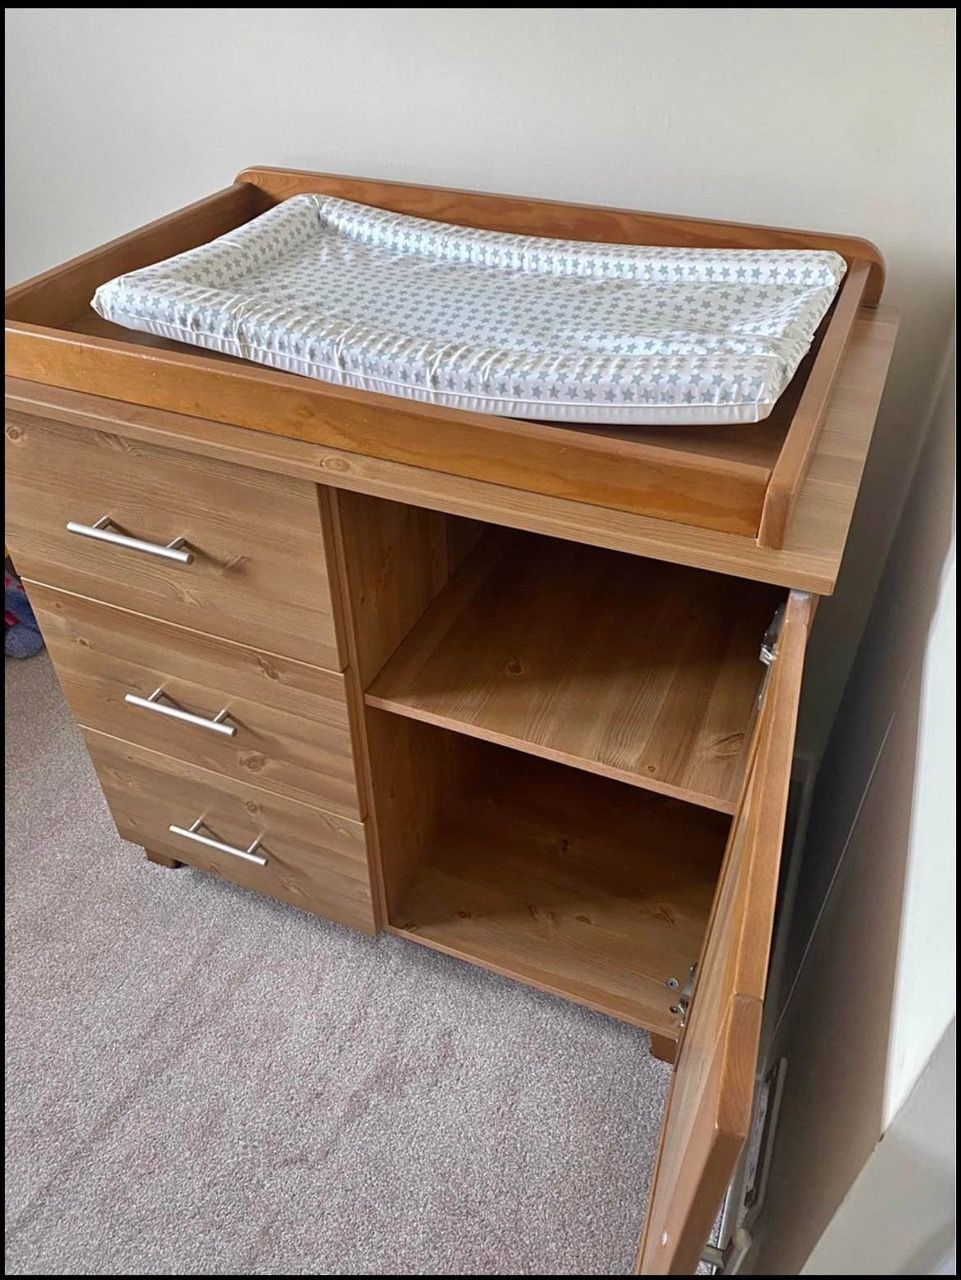 Before & After: Savvy DIYer creates kitchen island from £20 baby changing unit